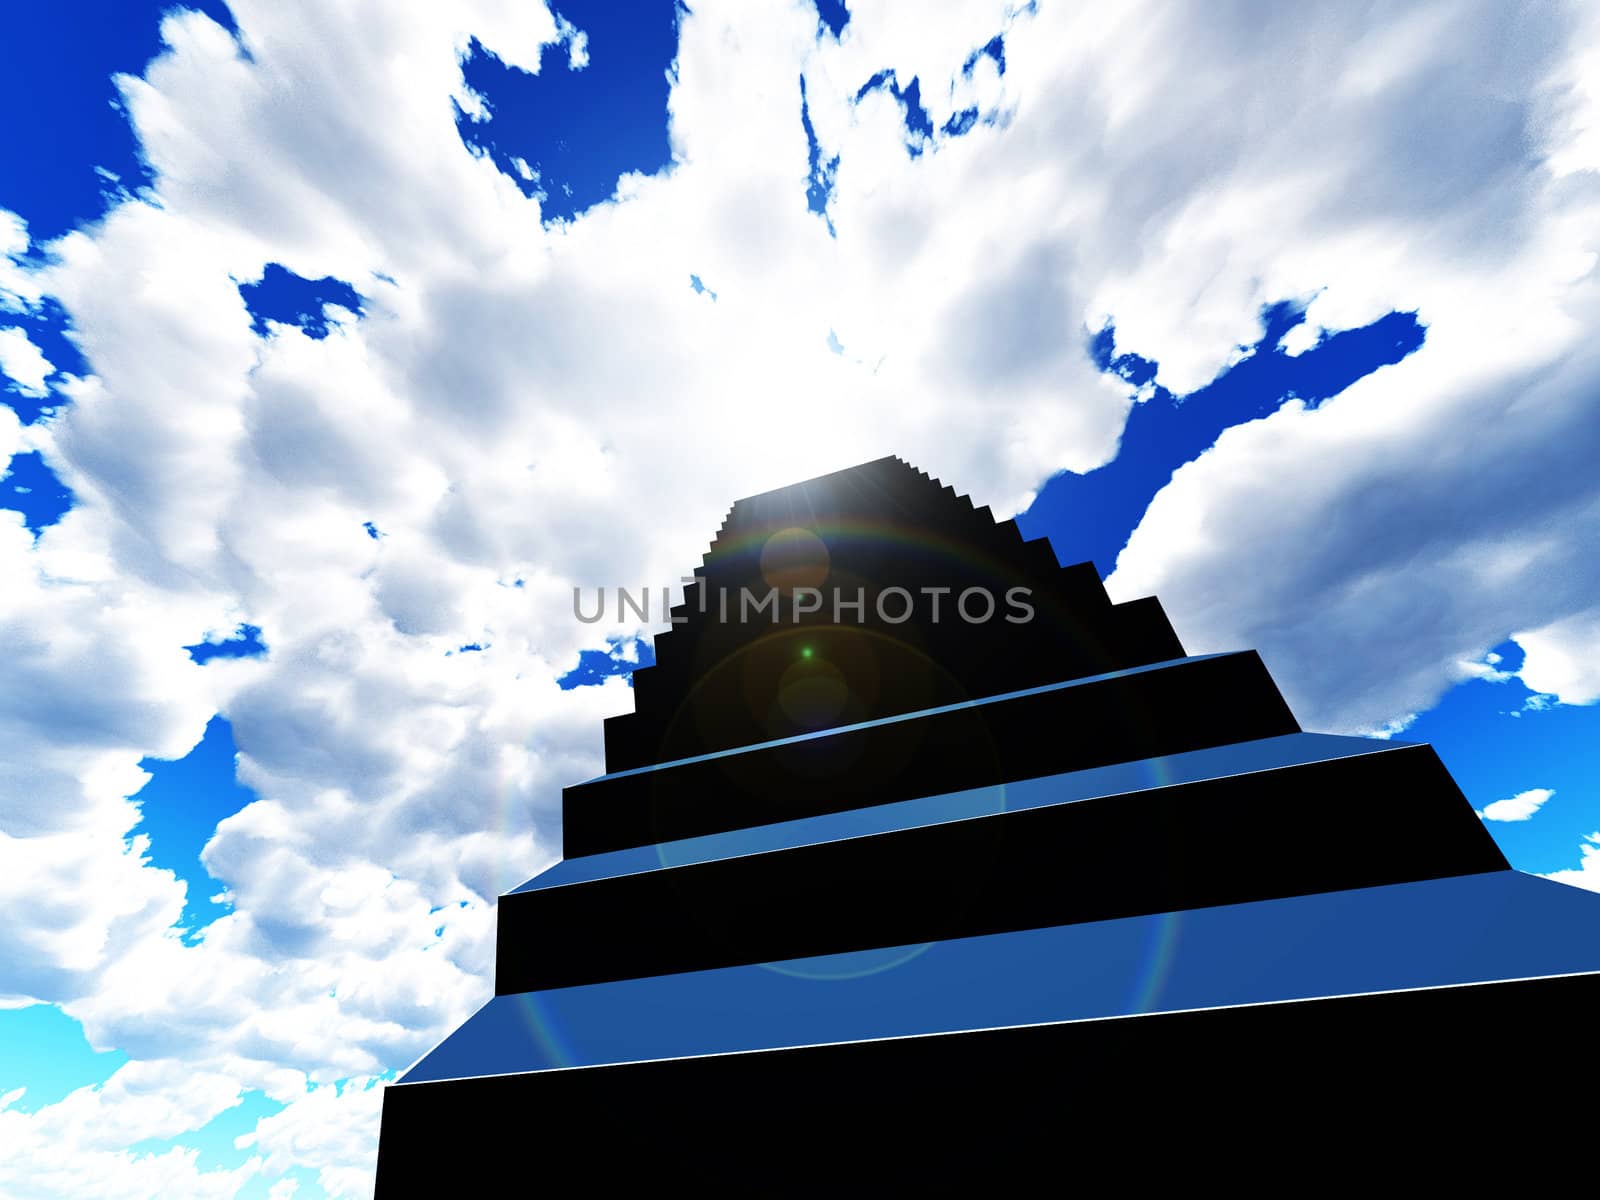 Conceptual image about a stairway to Heaven.